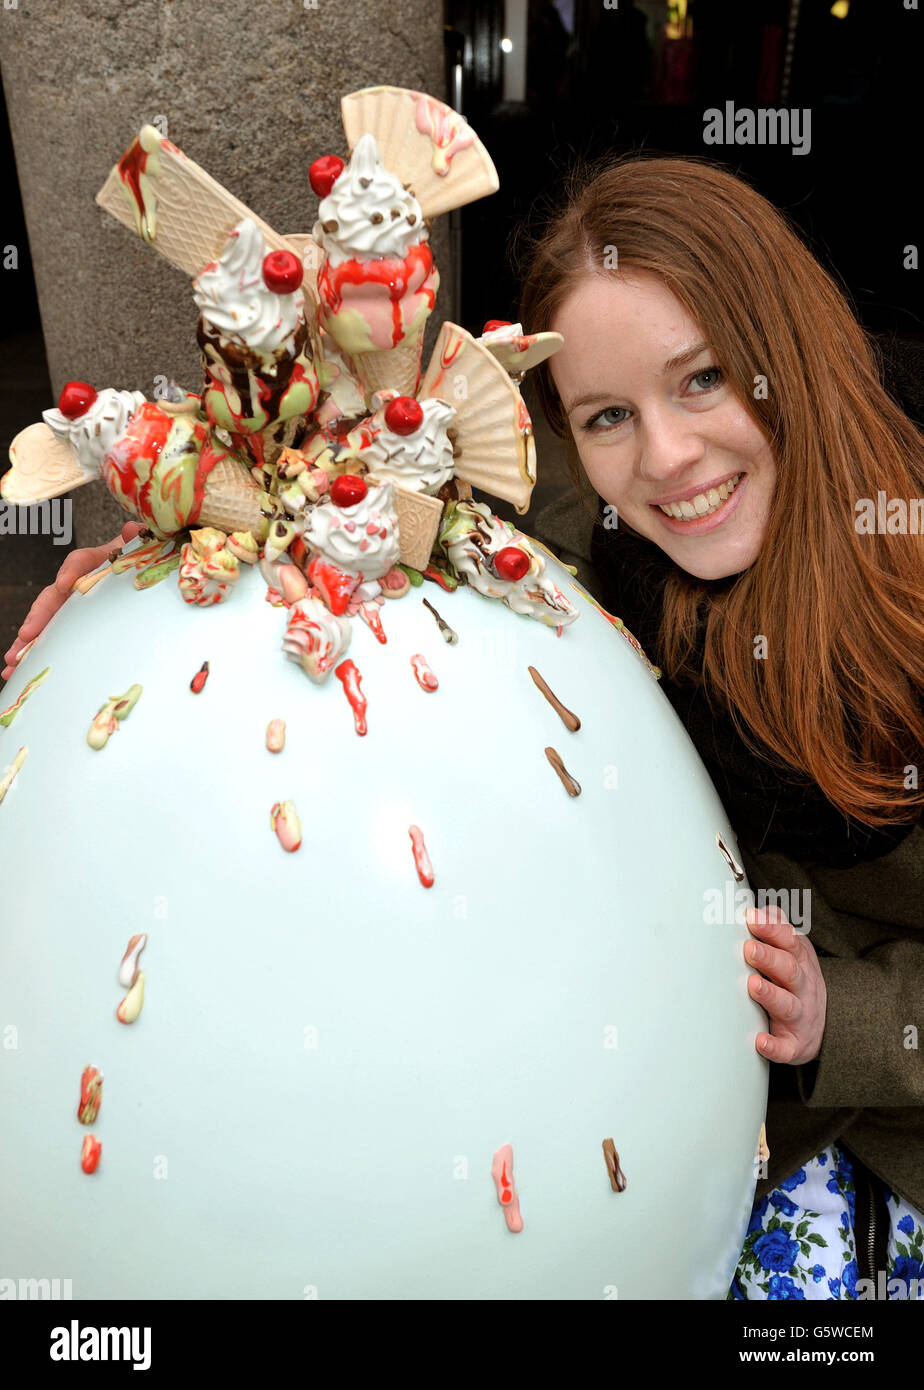 Artist Anna Barlow with her hand-painted and crafted giant Easter Egg, which is one of 100 that will be hidden in cities throughout the country from today until the 1st April, as part of the Lindt Big Egg hunt in support of the Action for Children Charity, in Covent Garden in central London. Stock Photo